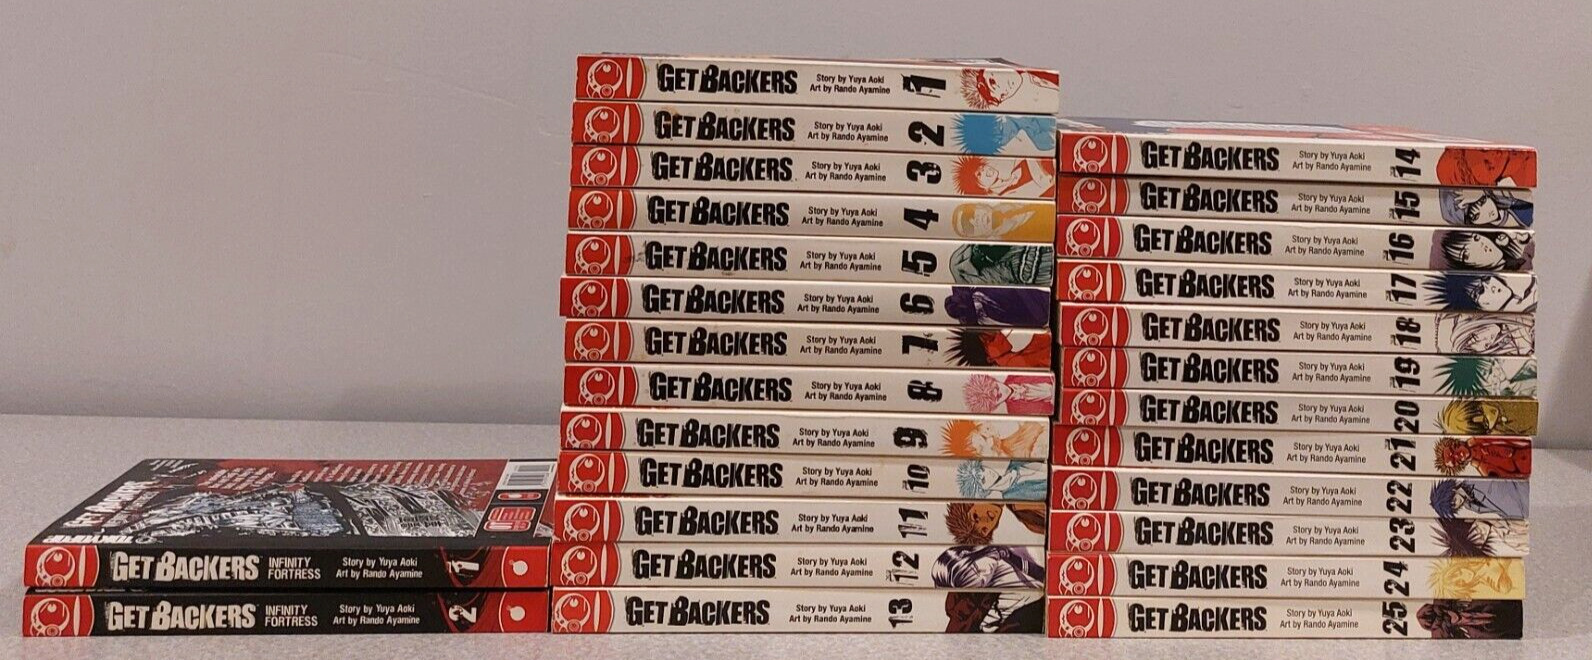 GET BACKERS VOL 1-25 + INFINITY FORTRESS VOL 1-2 COMPLETE MANGA ENGLISH TOKYOPOP